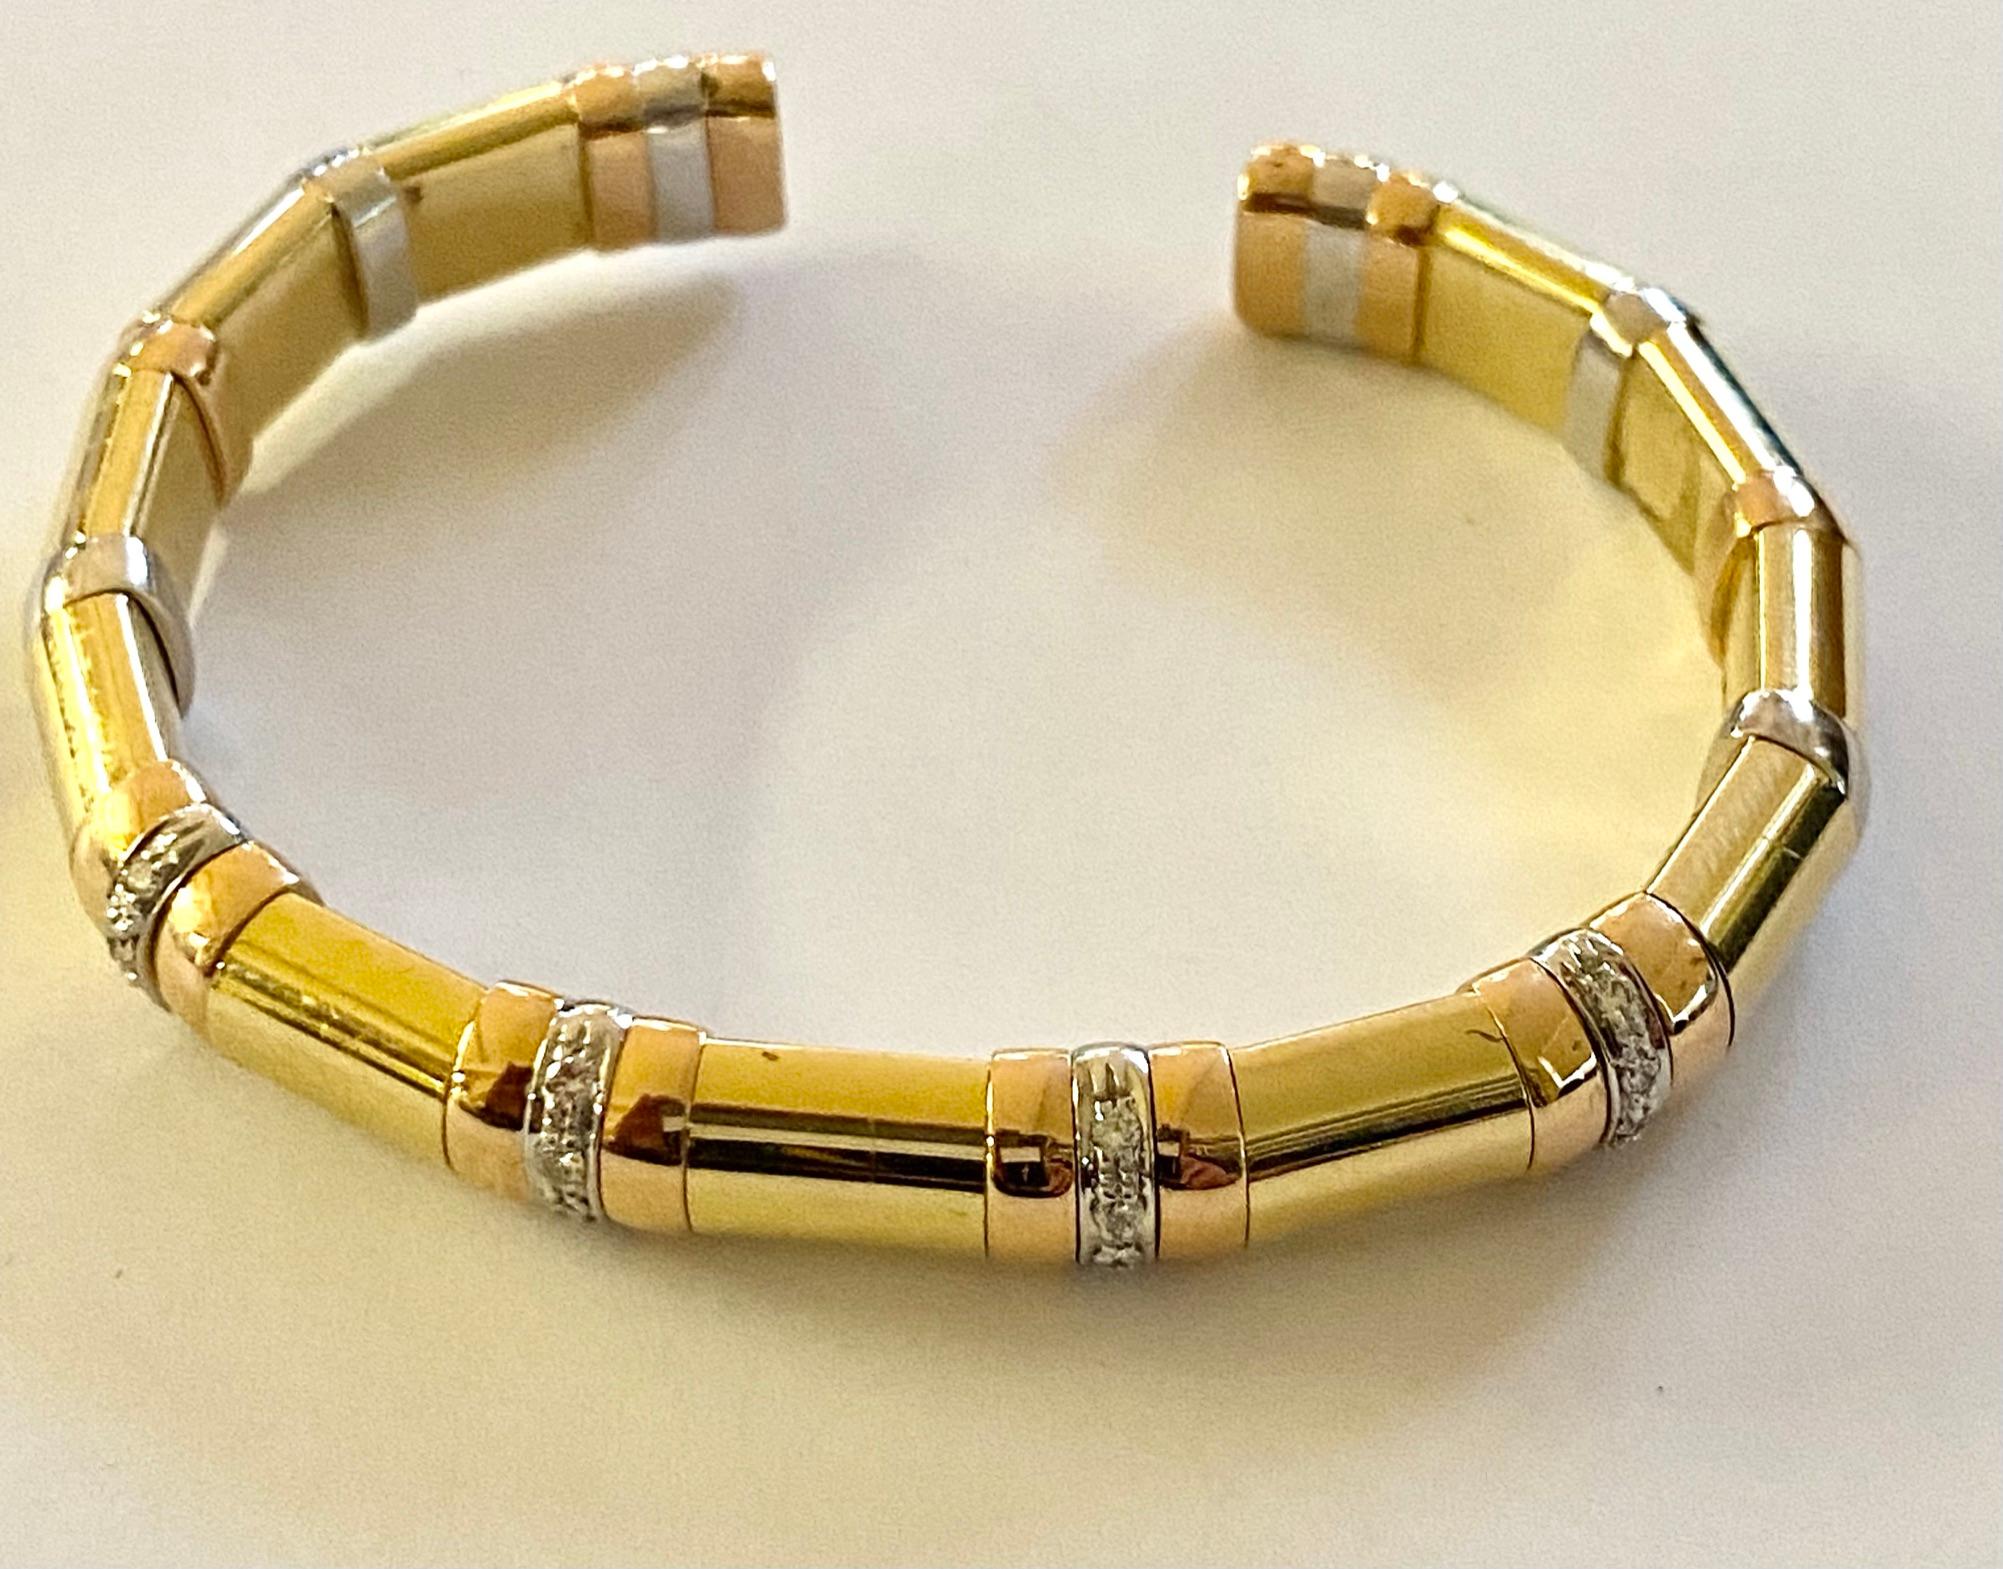 -  18K. yellow/red/white gold rigid bracelet with a silver core, Signed: Cesari 1995
-  Set with 16 brilliant cut diamonds = 0.32 ct VSI/W (f-G)
-  Size: wide: 8 mm thick: 5 mm
-  Inner size bracelet: 6 x 4.5 cm
-  Outside size bracelet: 6.7 x 5.5